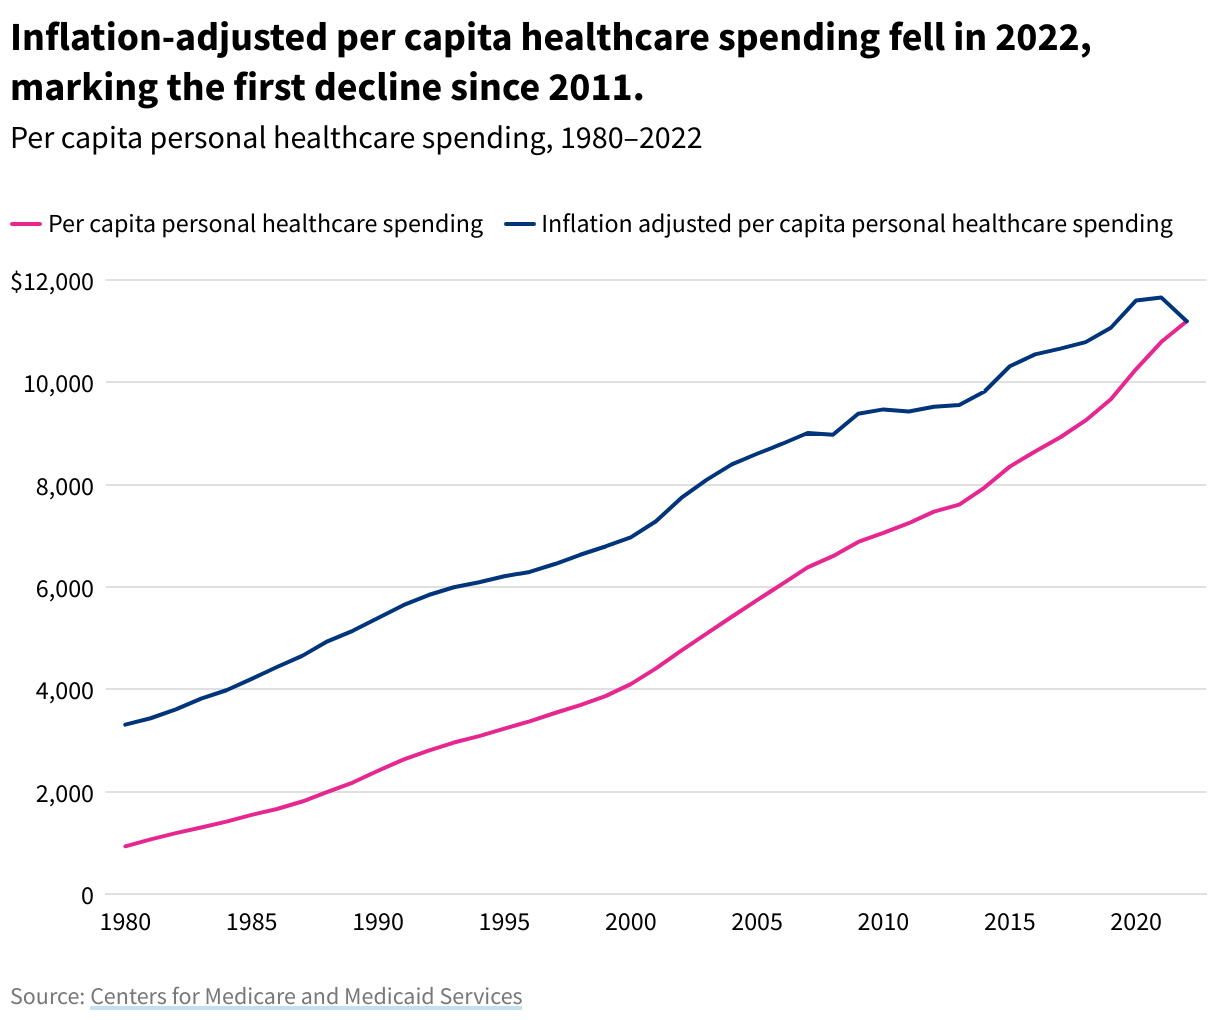 Line chart showing per-capita personal healthcare spending and inflation-adjusted per-capita healthcare spending.